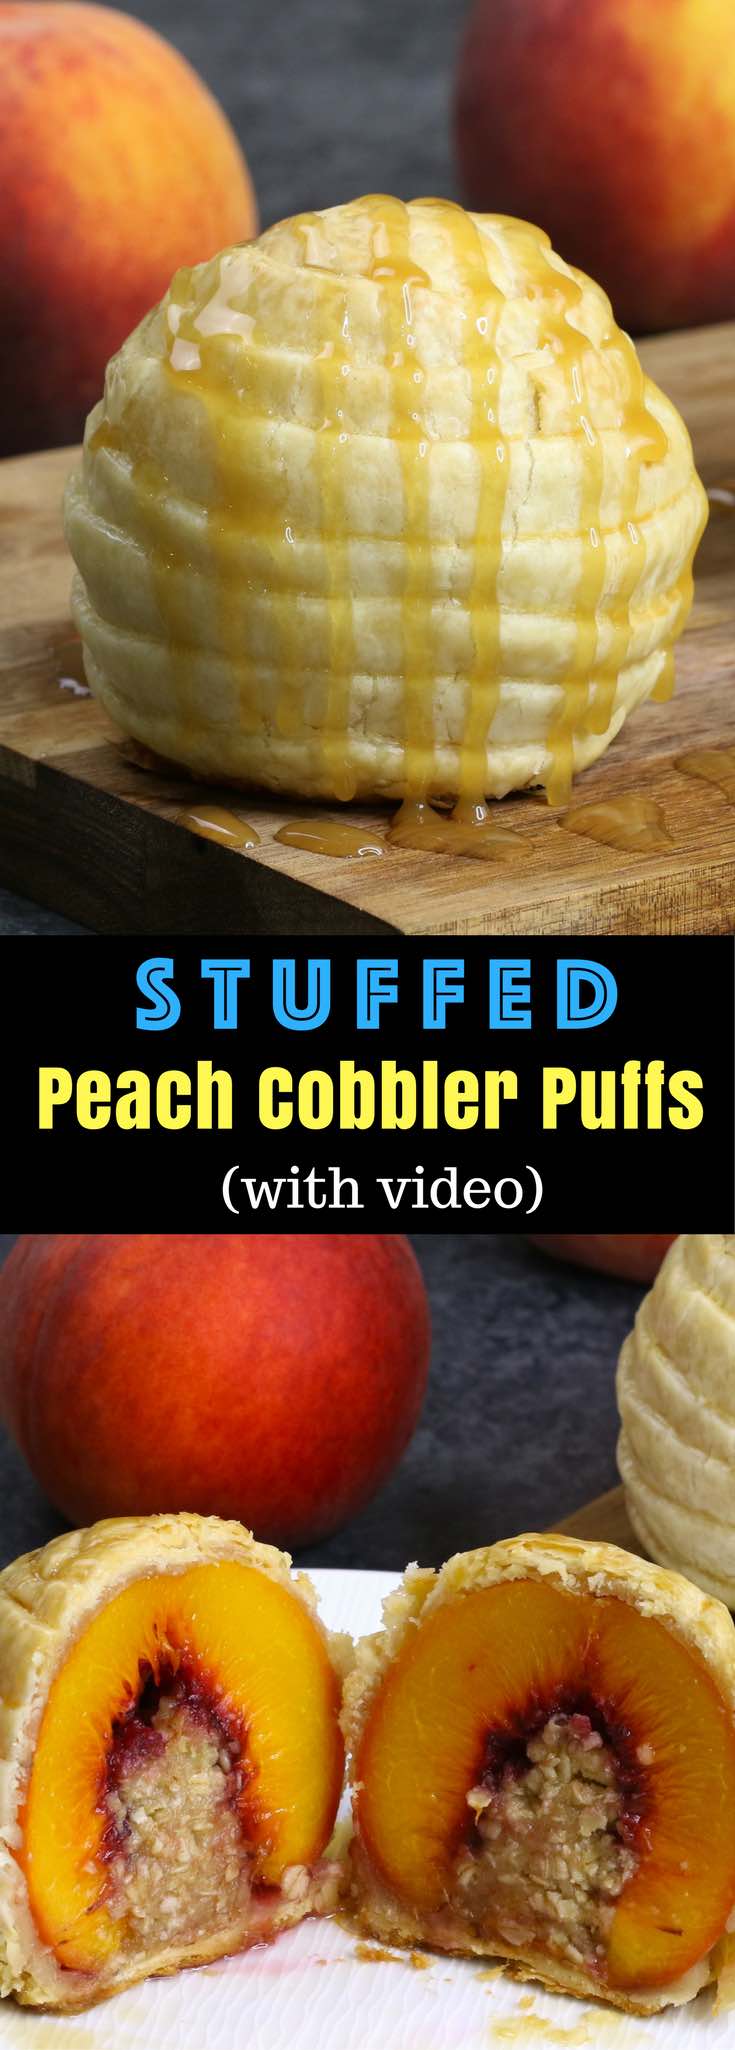 Stuffed Peach Cobbler Puffs – Tender and moist fresh peach stuffed with sweet crumbles, and then wrapped with pie crust. Makes a delicious summer dessert and will definitely wow your family and friends. And it’s simple to make! All you need is fresh peaches, butter, brown sugar, flour oats and pie crust. So Good! Quick and easy recipe. Party food. Great for a holiday brunch. Video recipe. | Tipbuzz.com